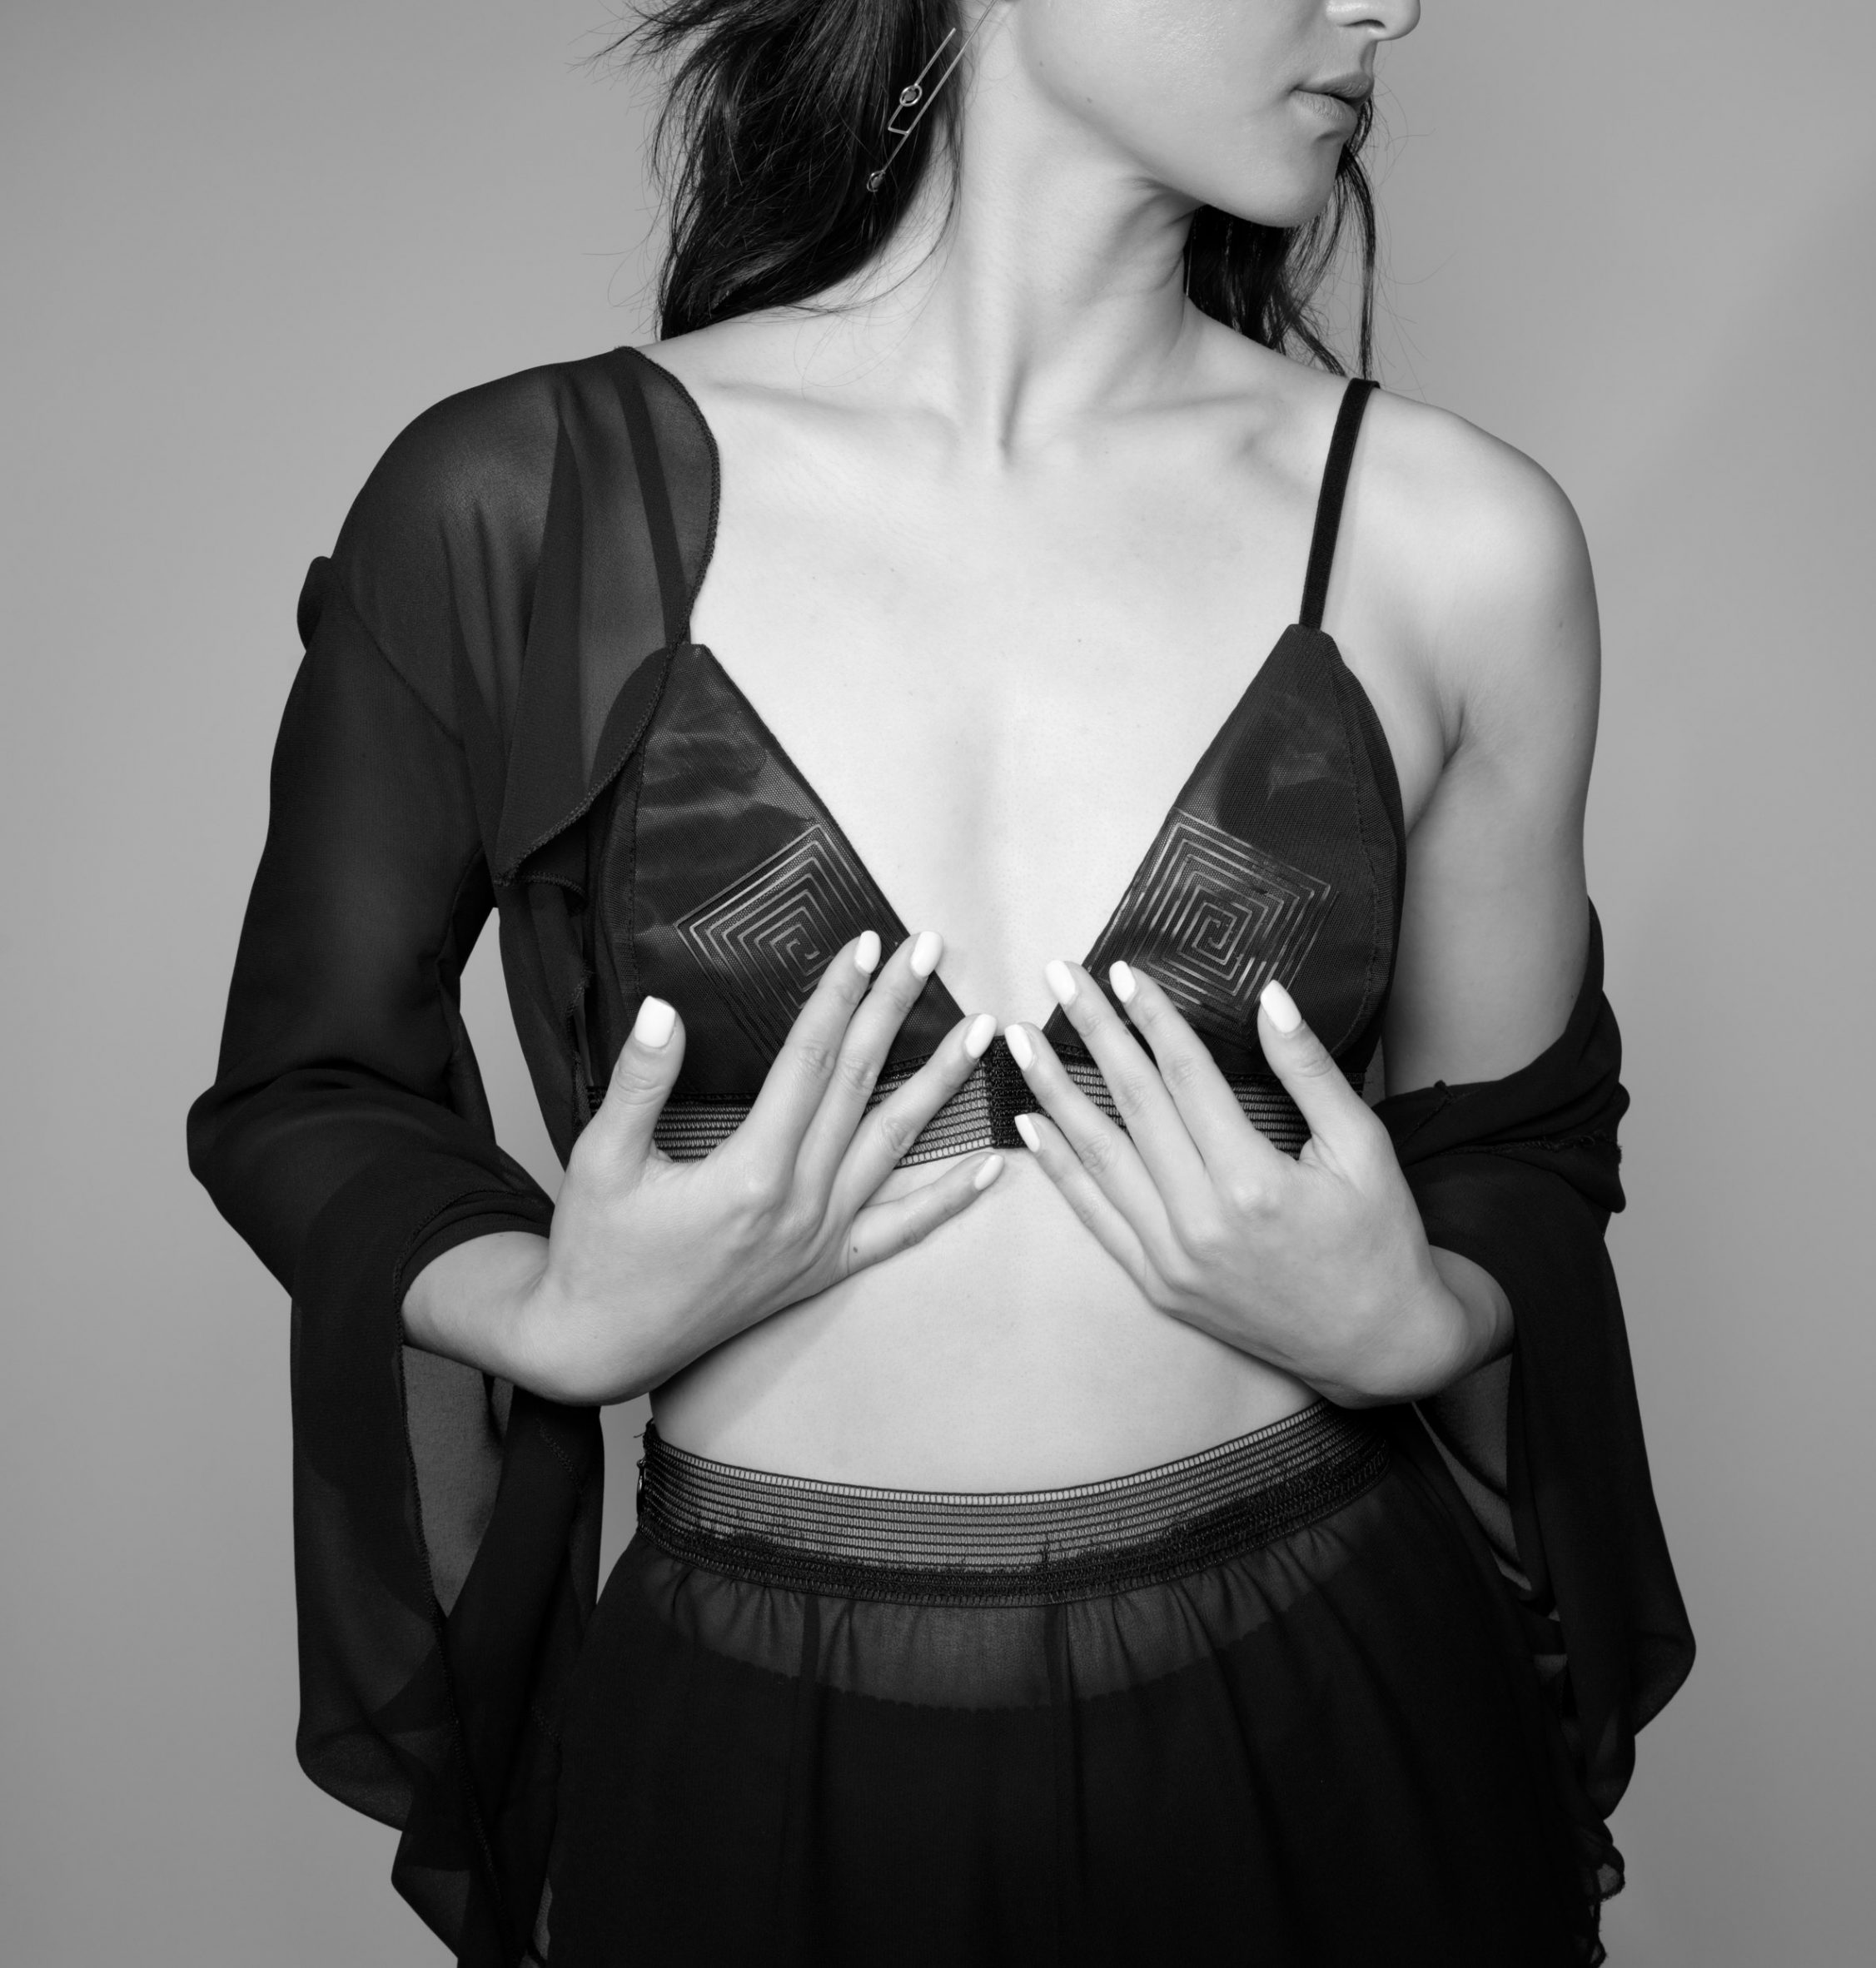 Black and white photo of a woman from the chin down wearing the black Enigma bralette and pants, with a light robe over the top